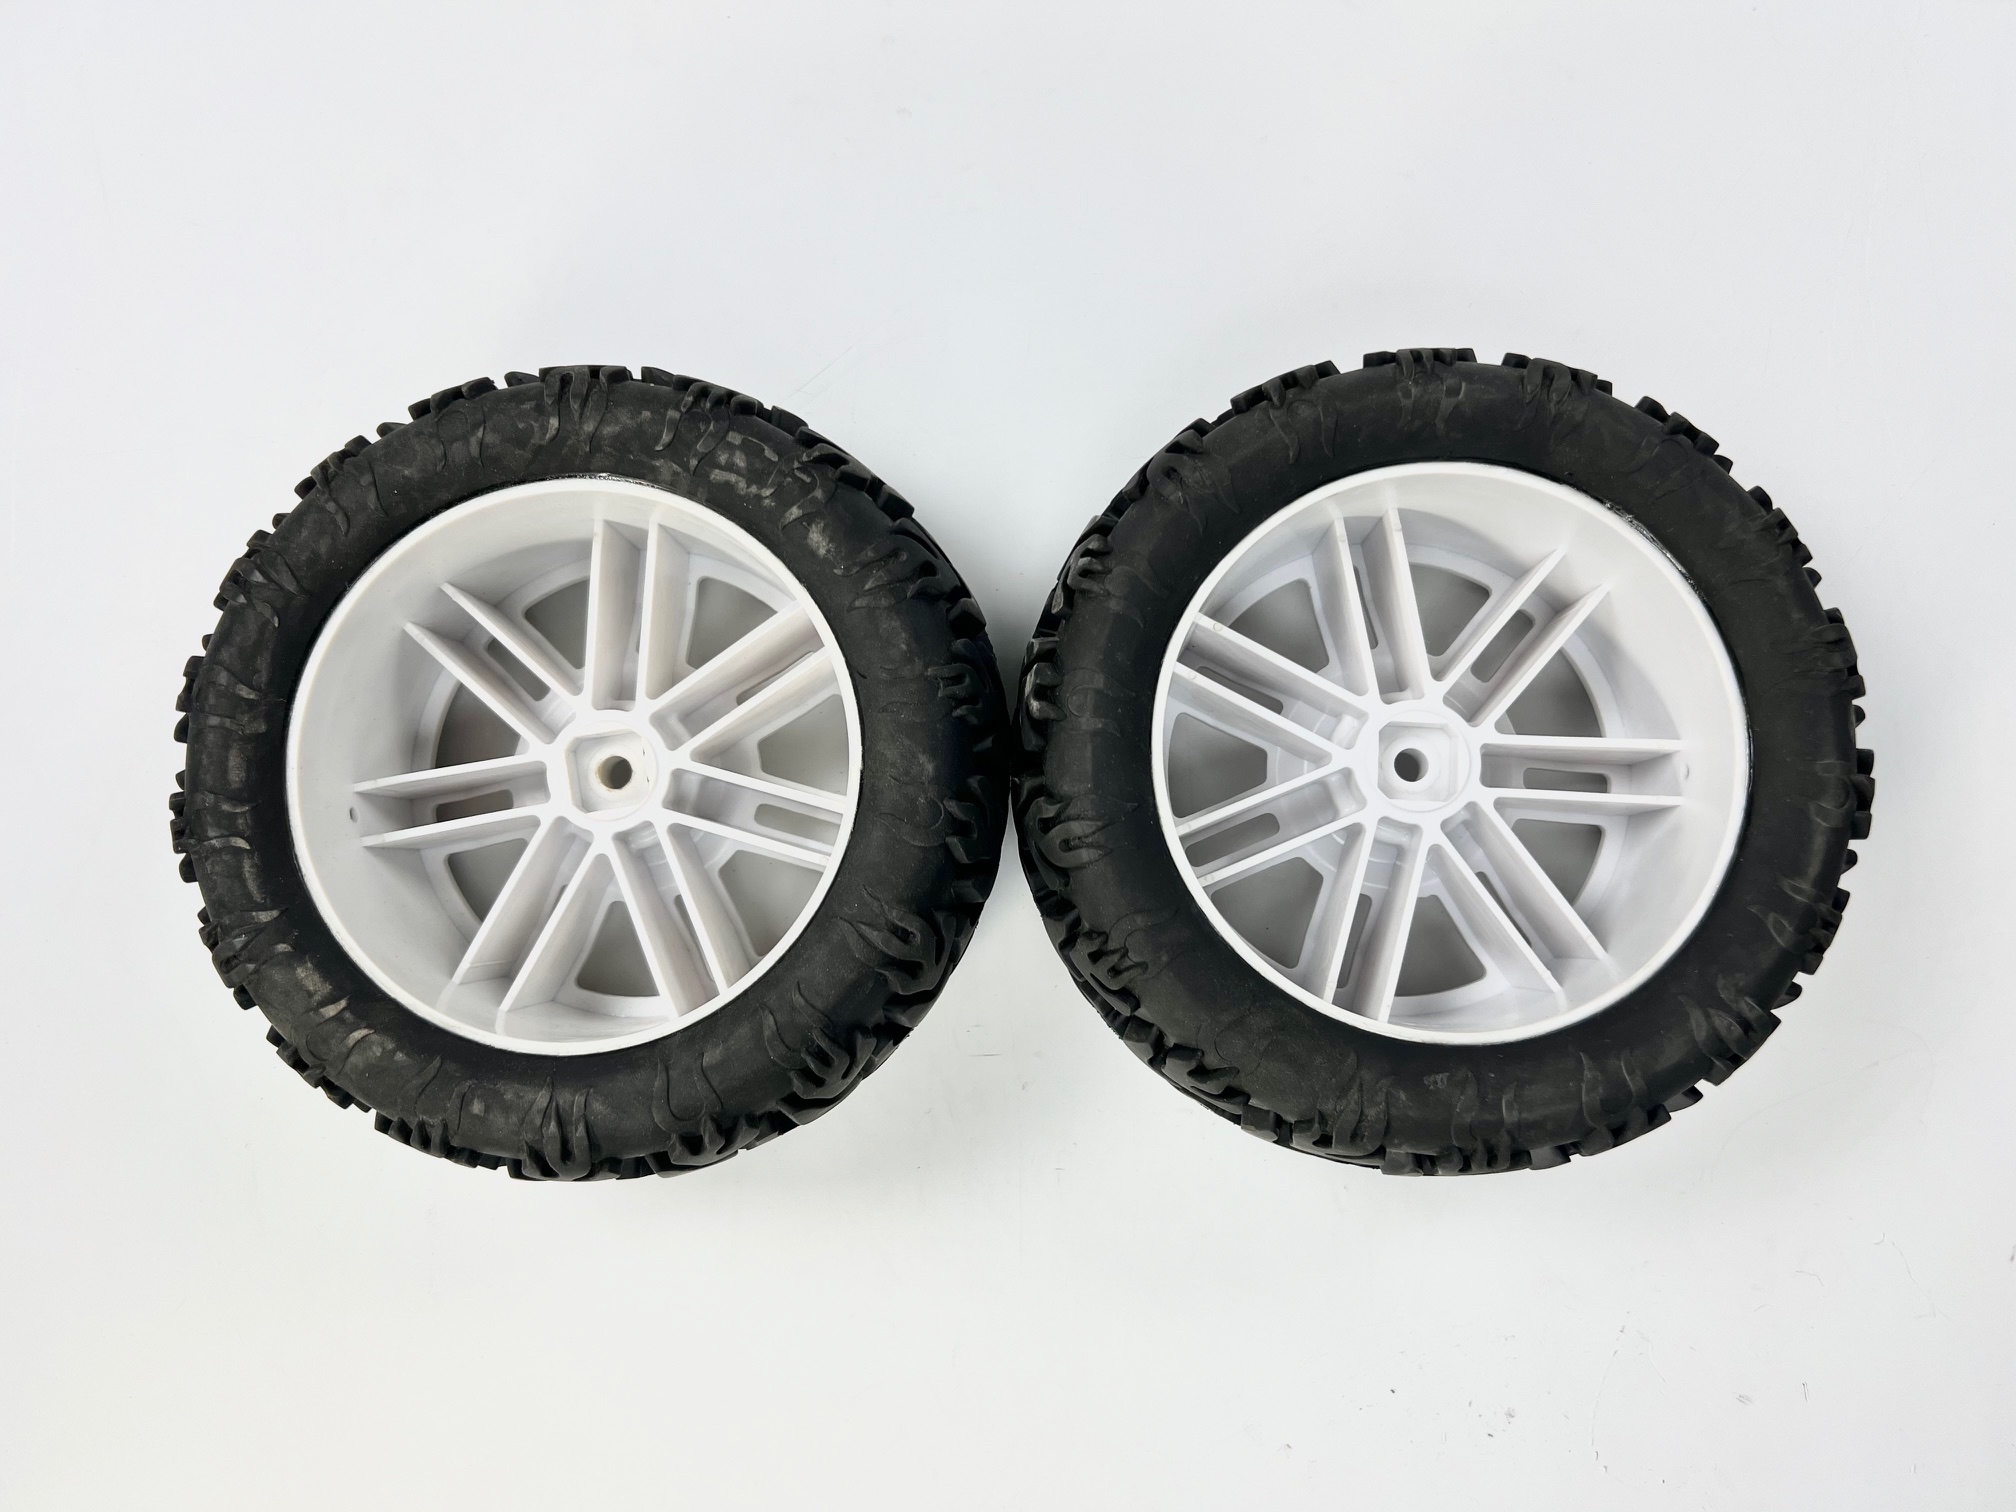 1 pair of off-road tyres on white rim with 18 mm square bonded "8"